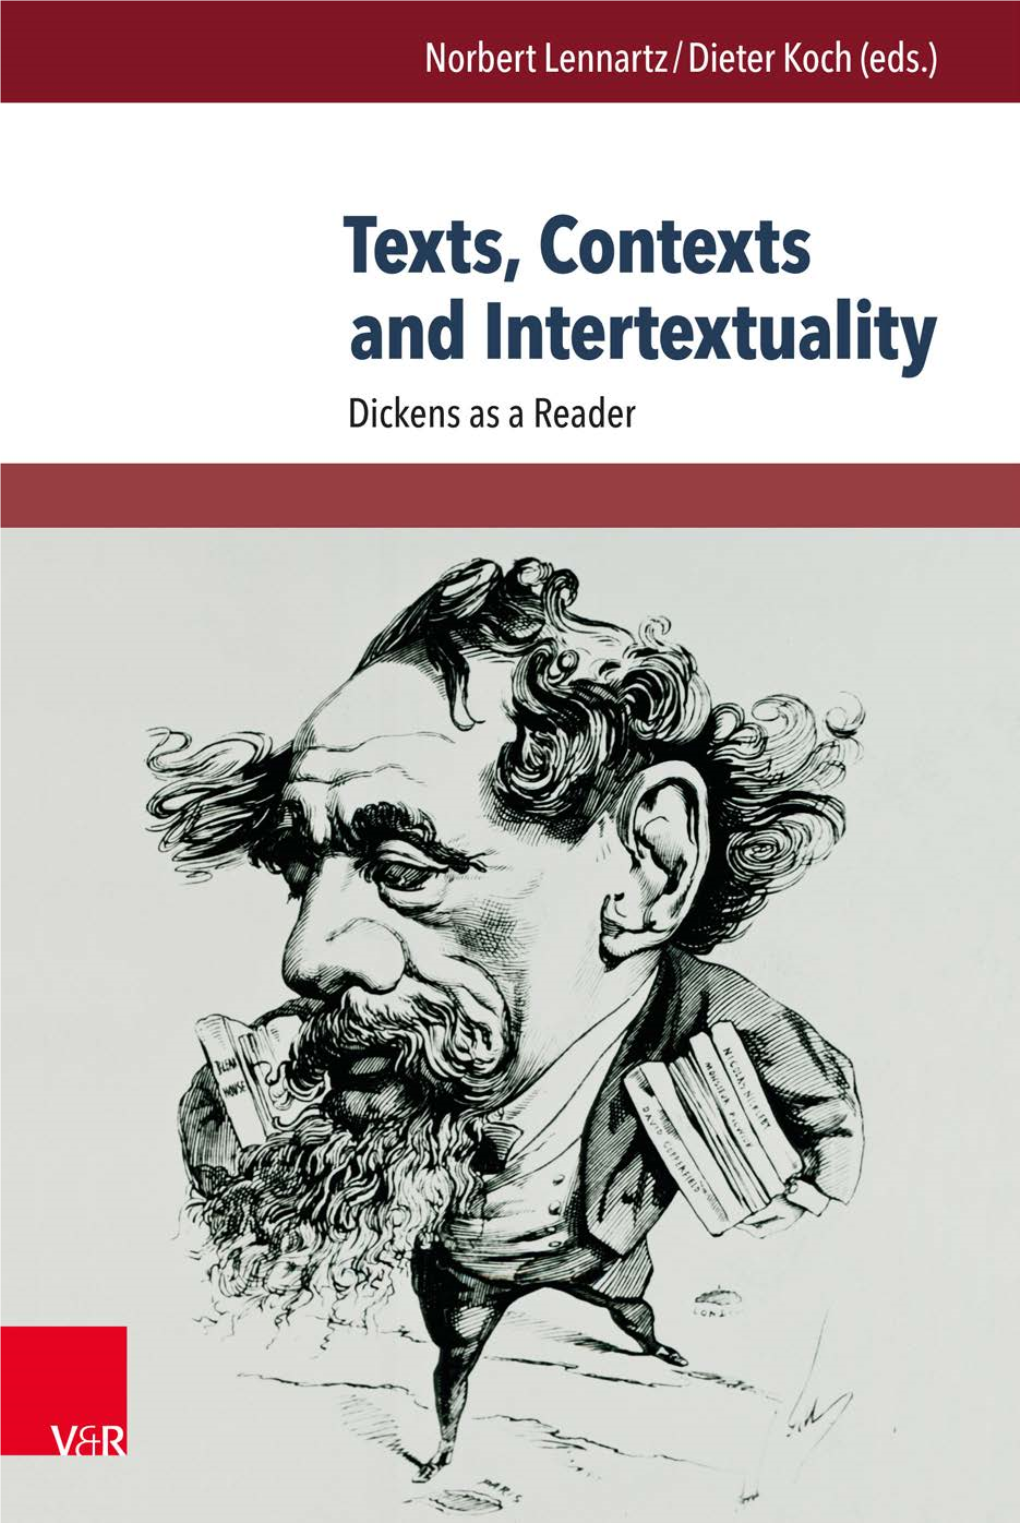 Texts, Contexts and Intertextuality